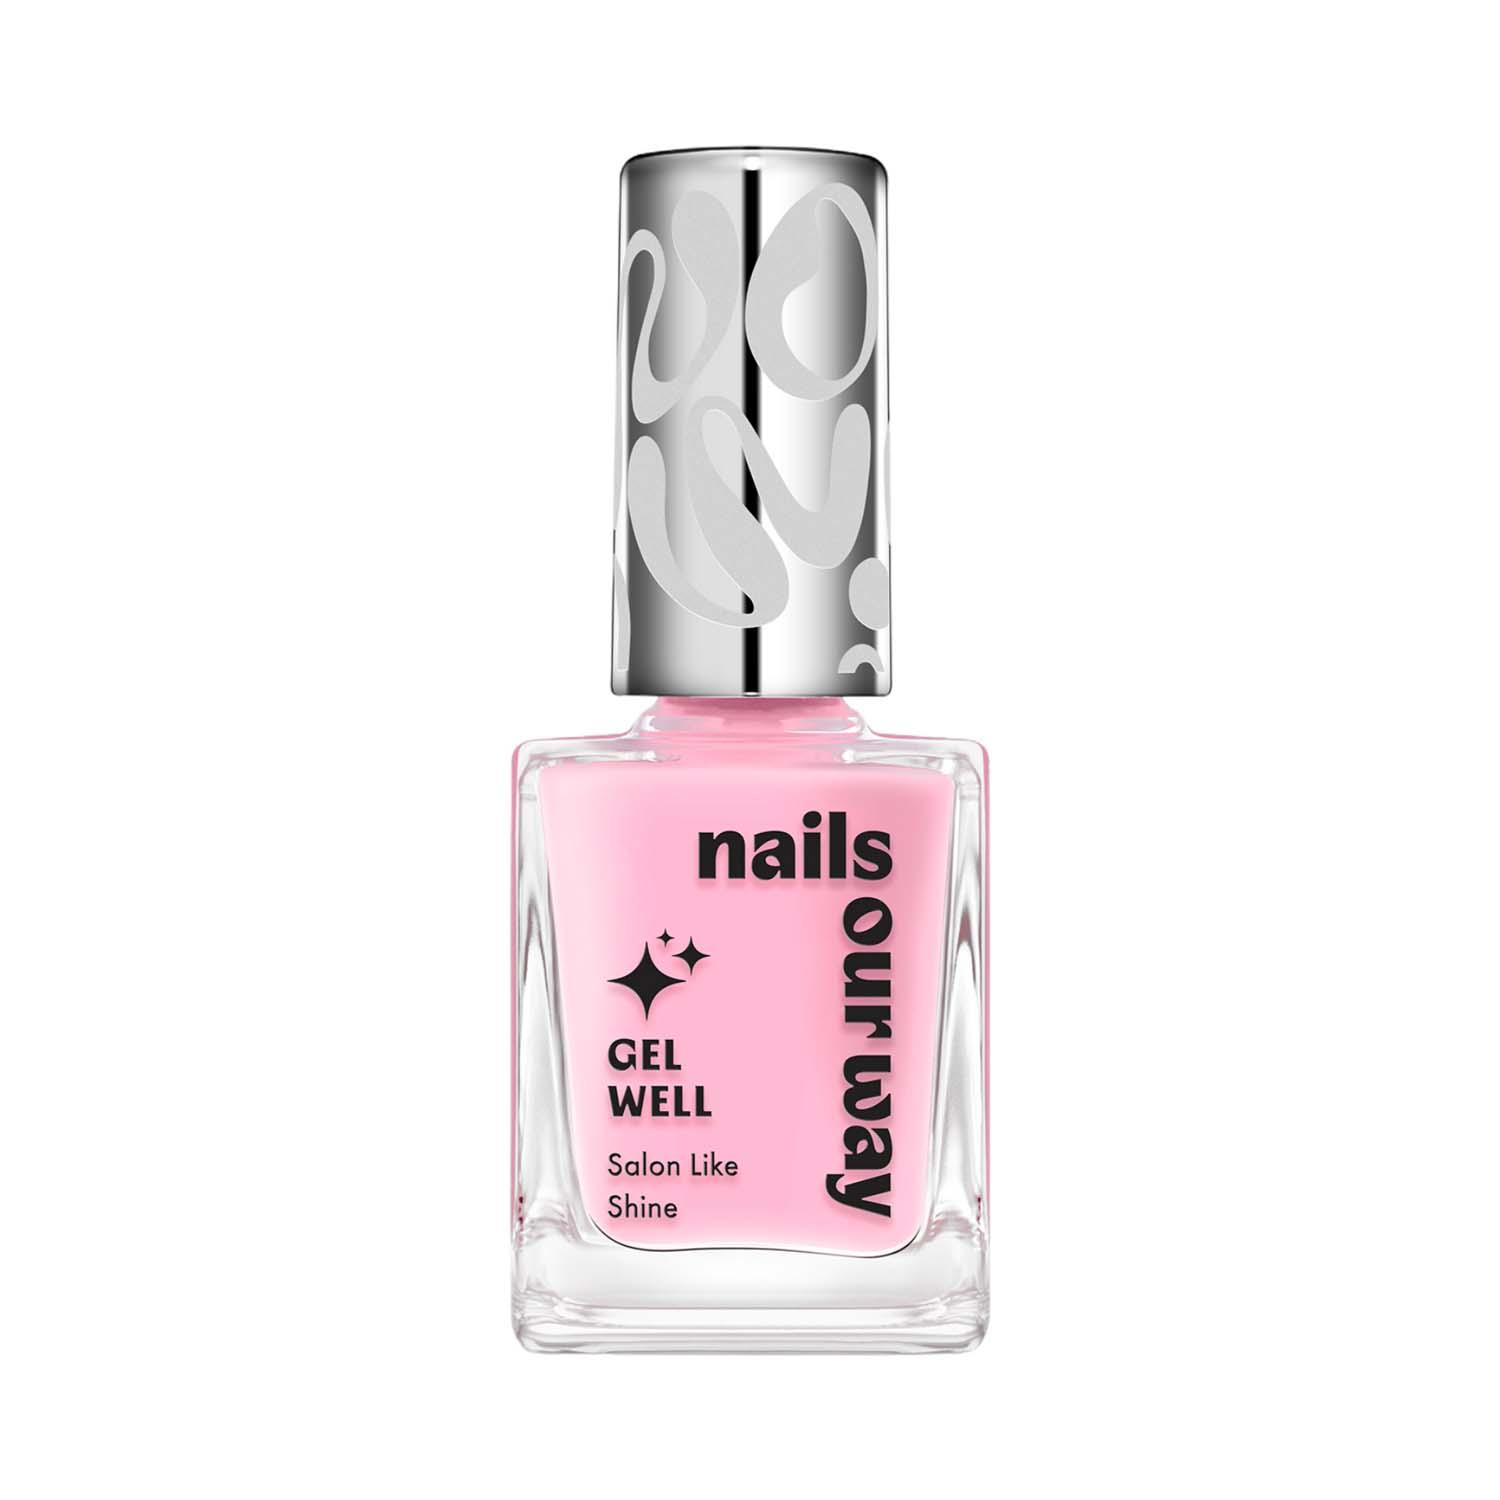 Nails Our Way | Nails Our Way Gel Well Nail Enamel - 202 Alluring (10 ml)